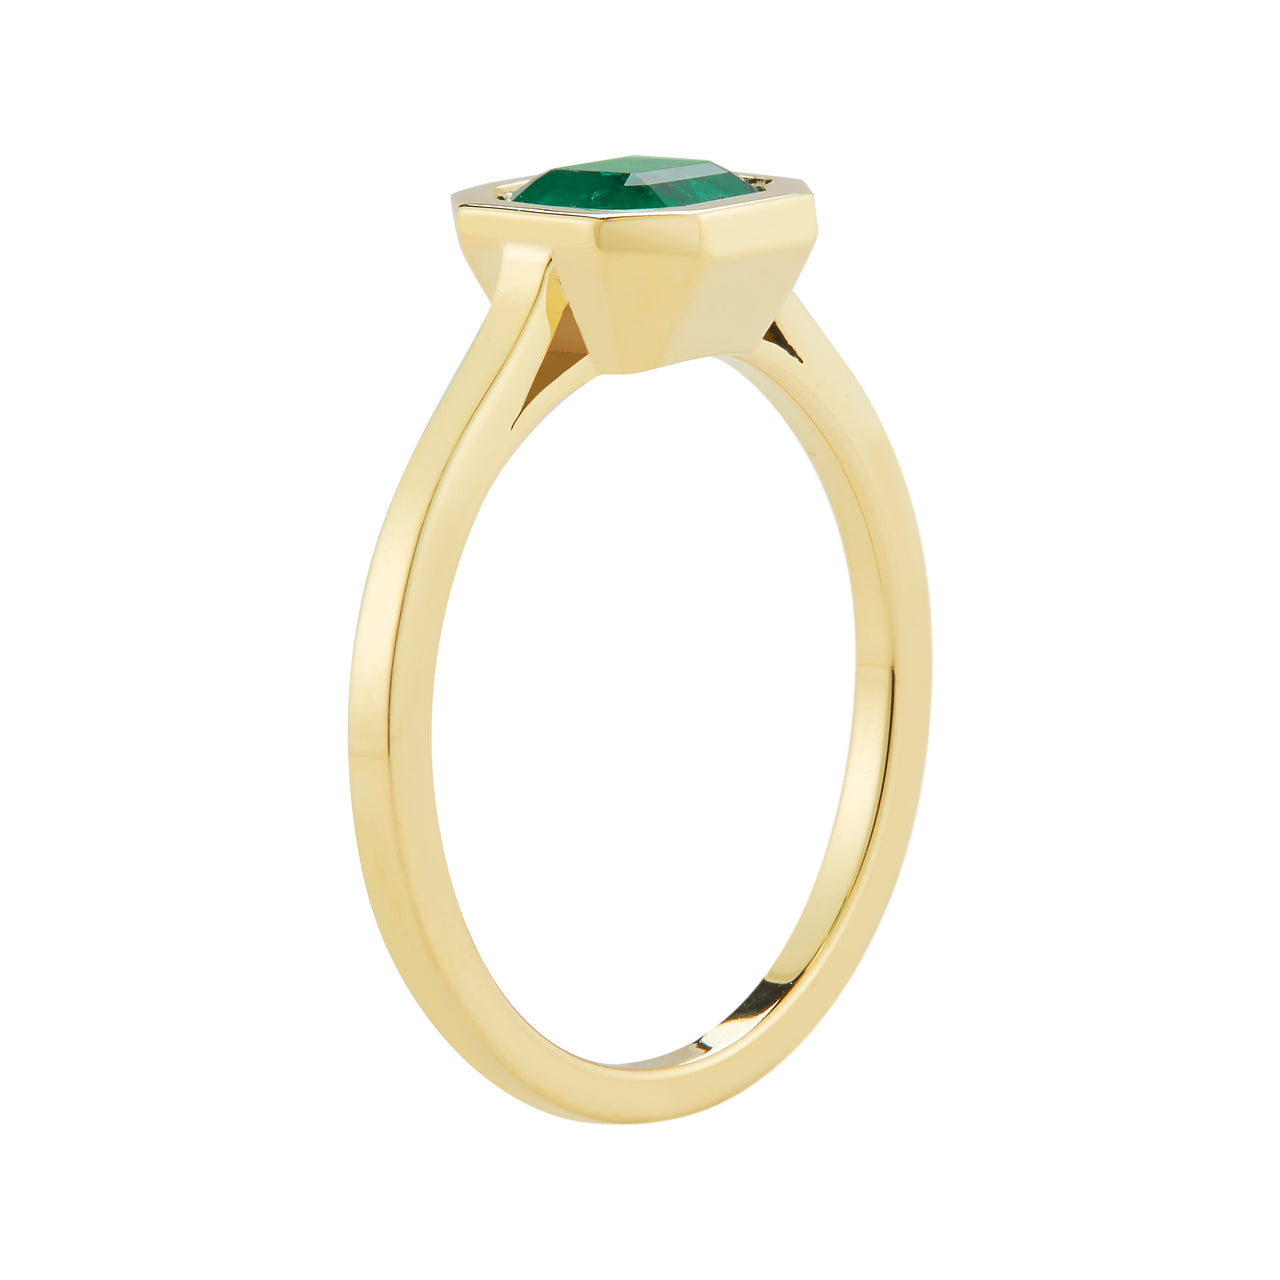 Custom Emerald Engagement Ring by Finn by Candice Pool Neistat